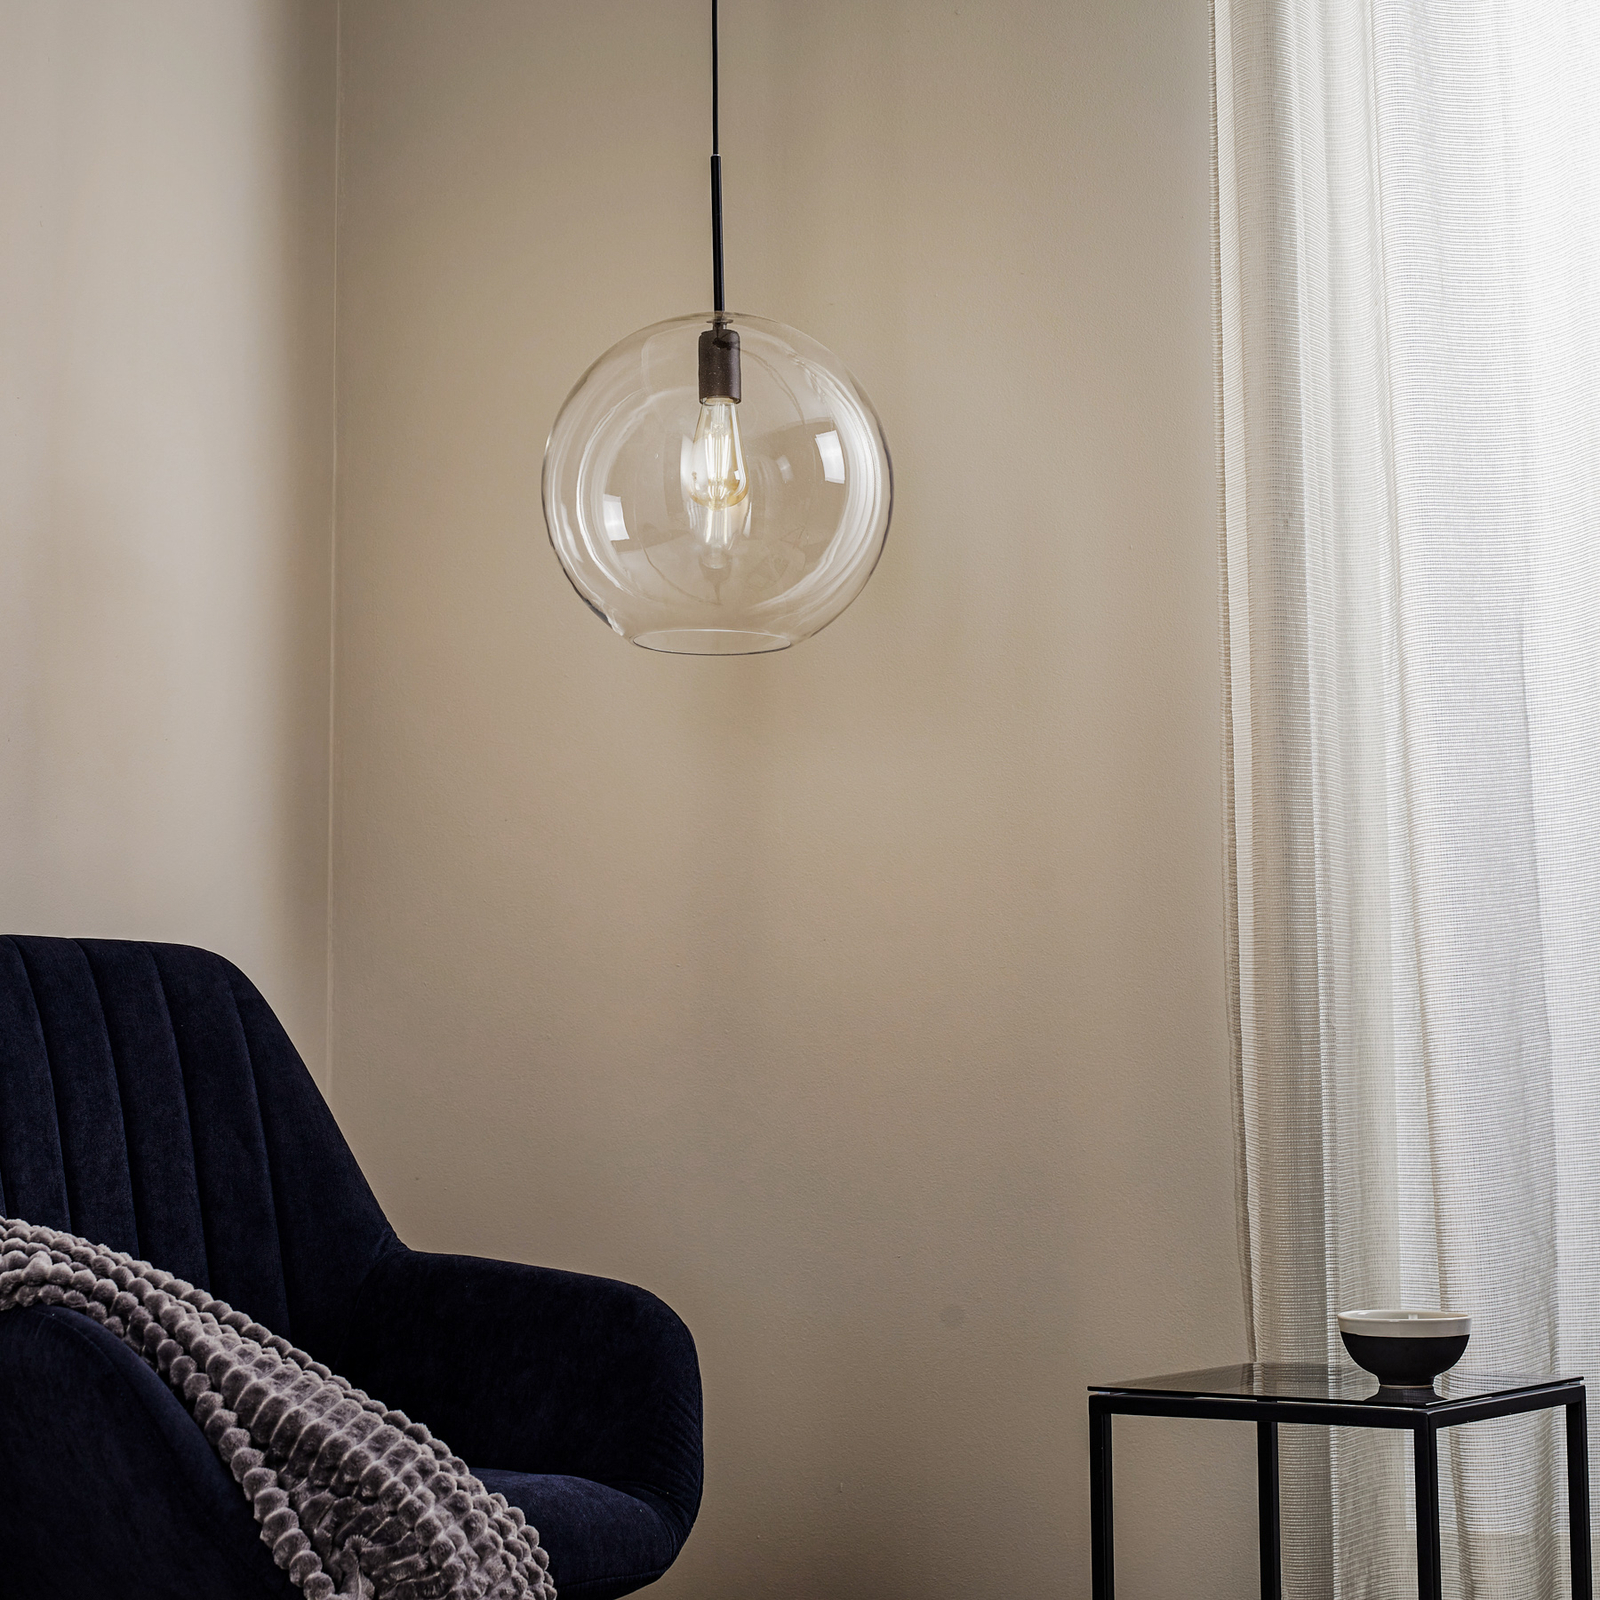 Sphere XL pendant light with glass shade